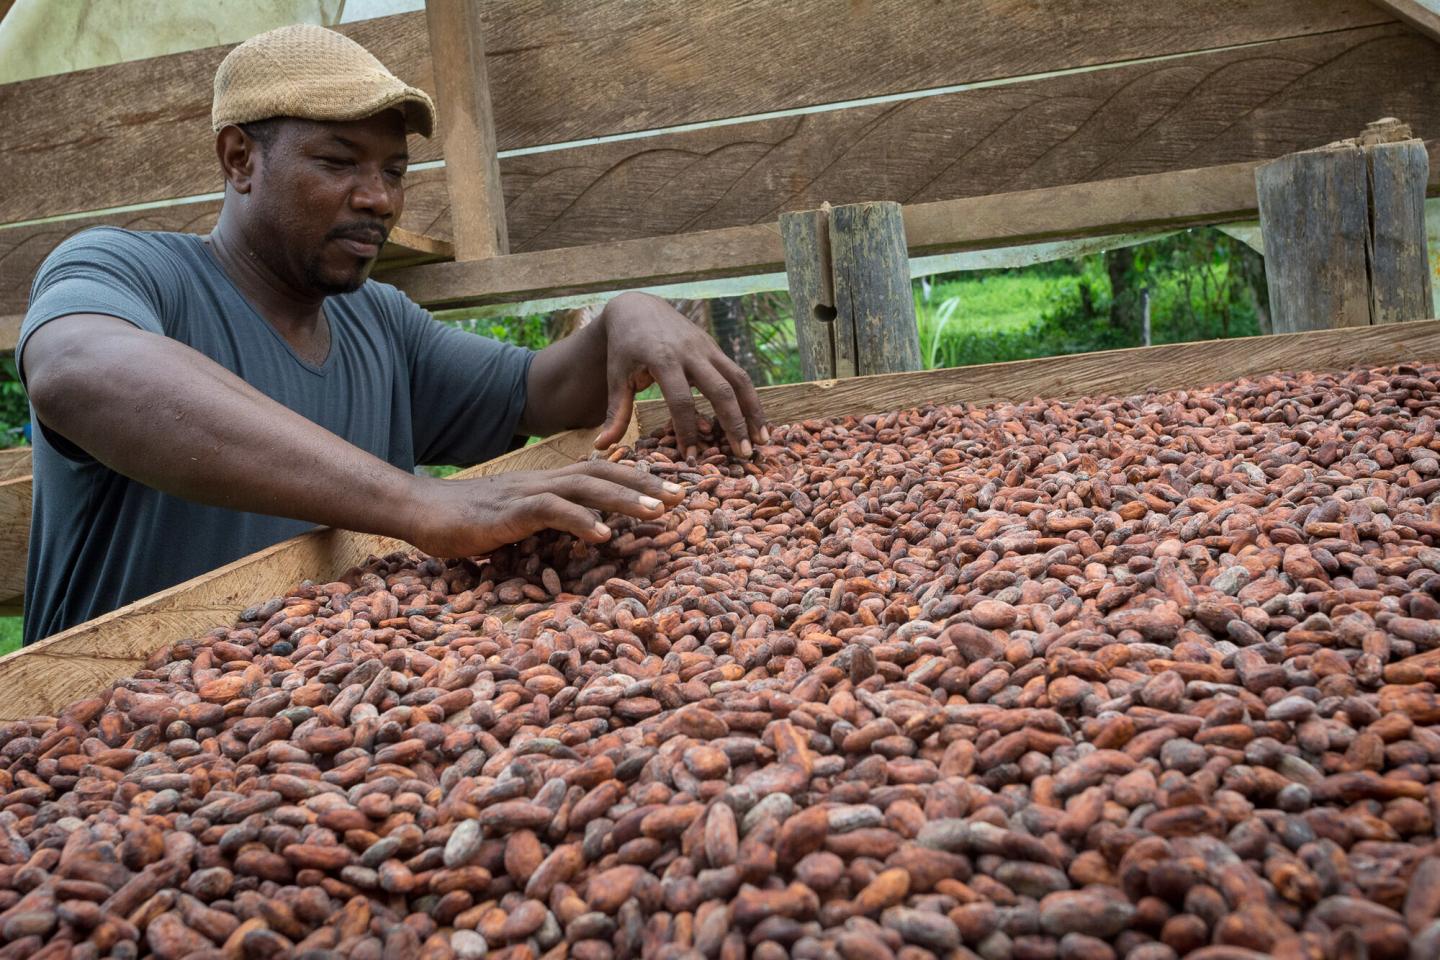 A man sorts through a tray of cacao seeds